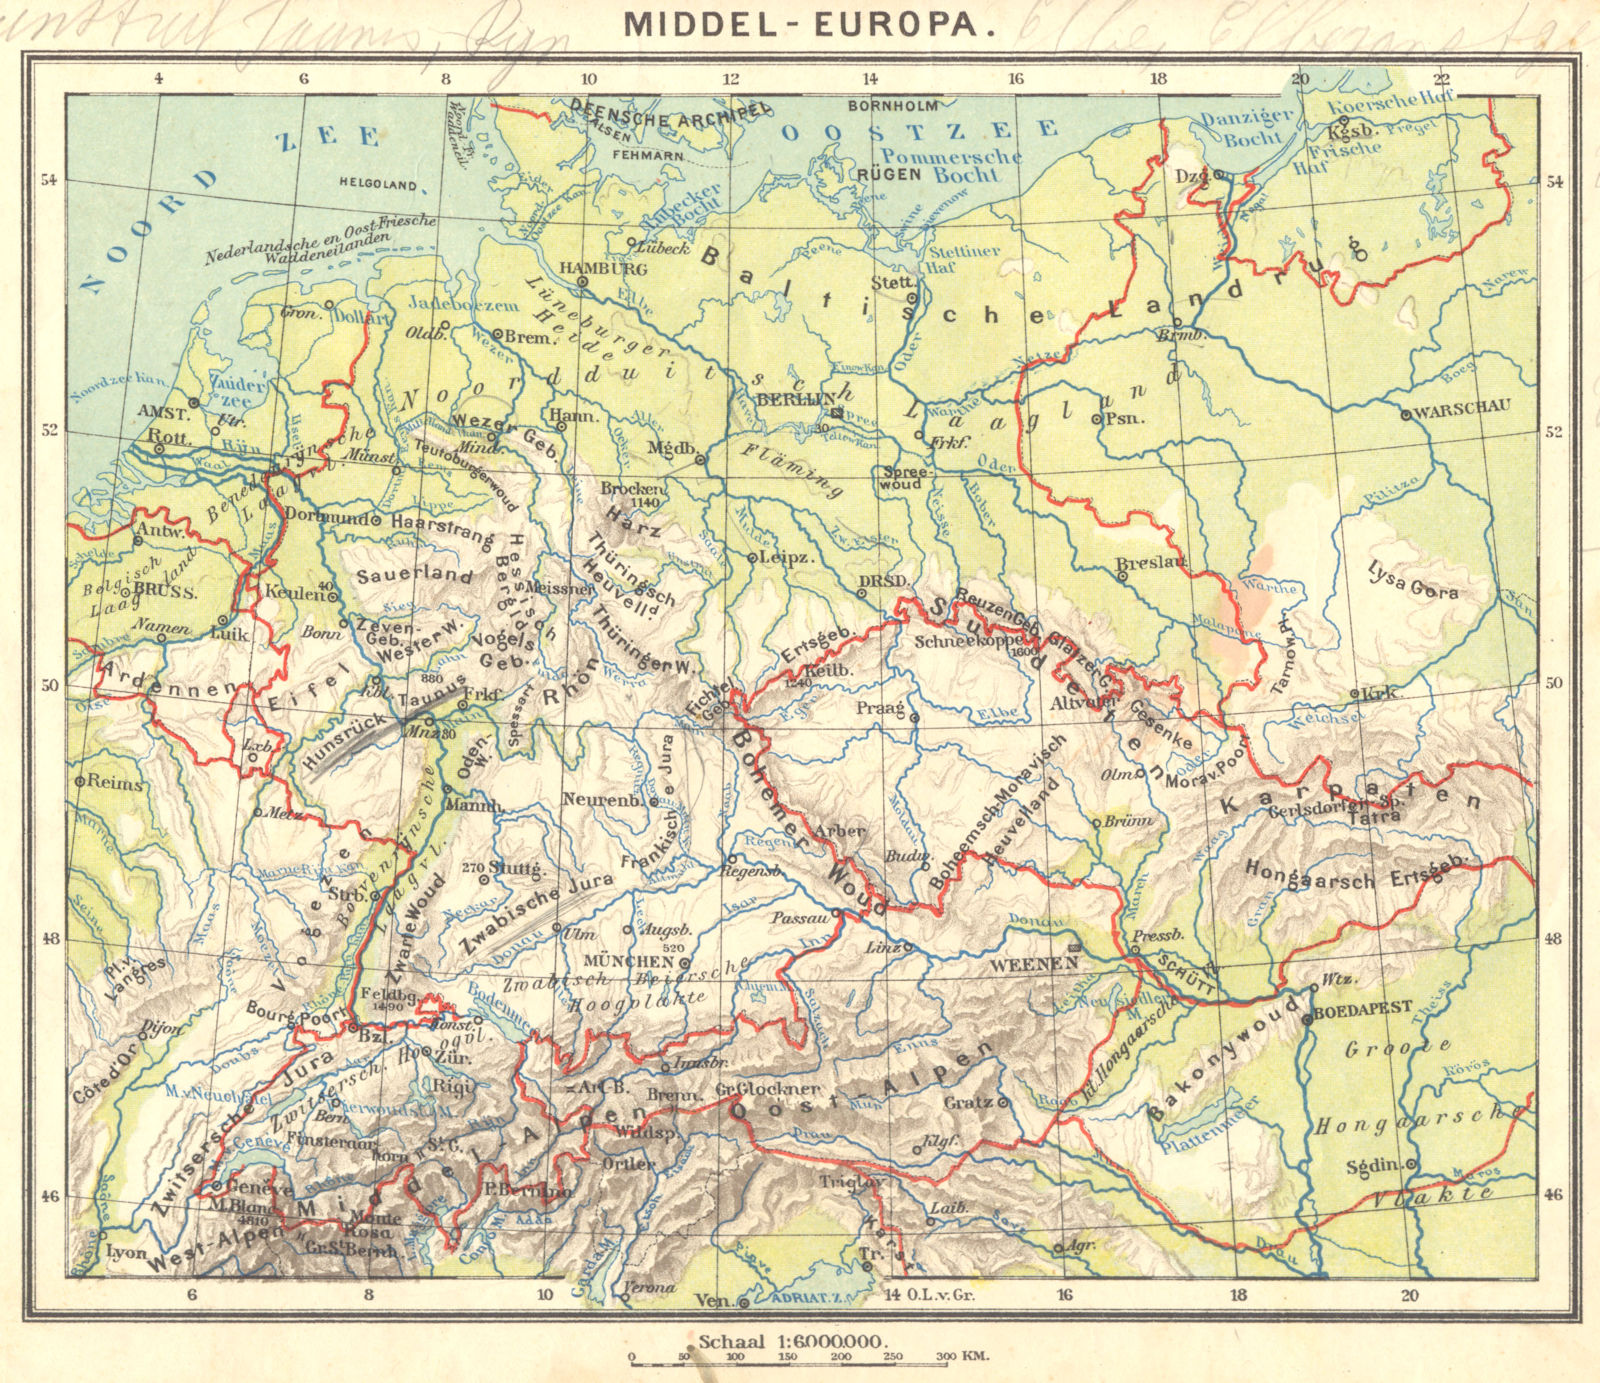 Associate Product EUROPE. Middel- Europa 1922 old vintage map plan chart